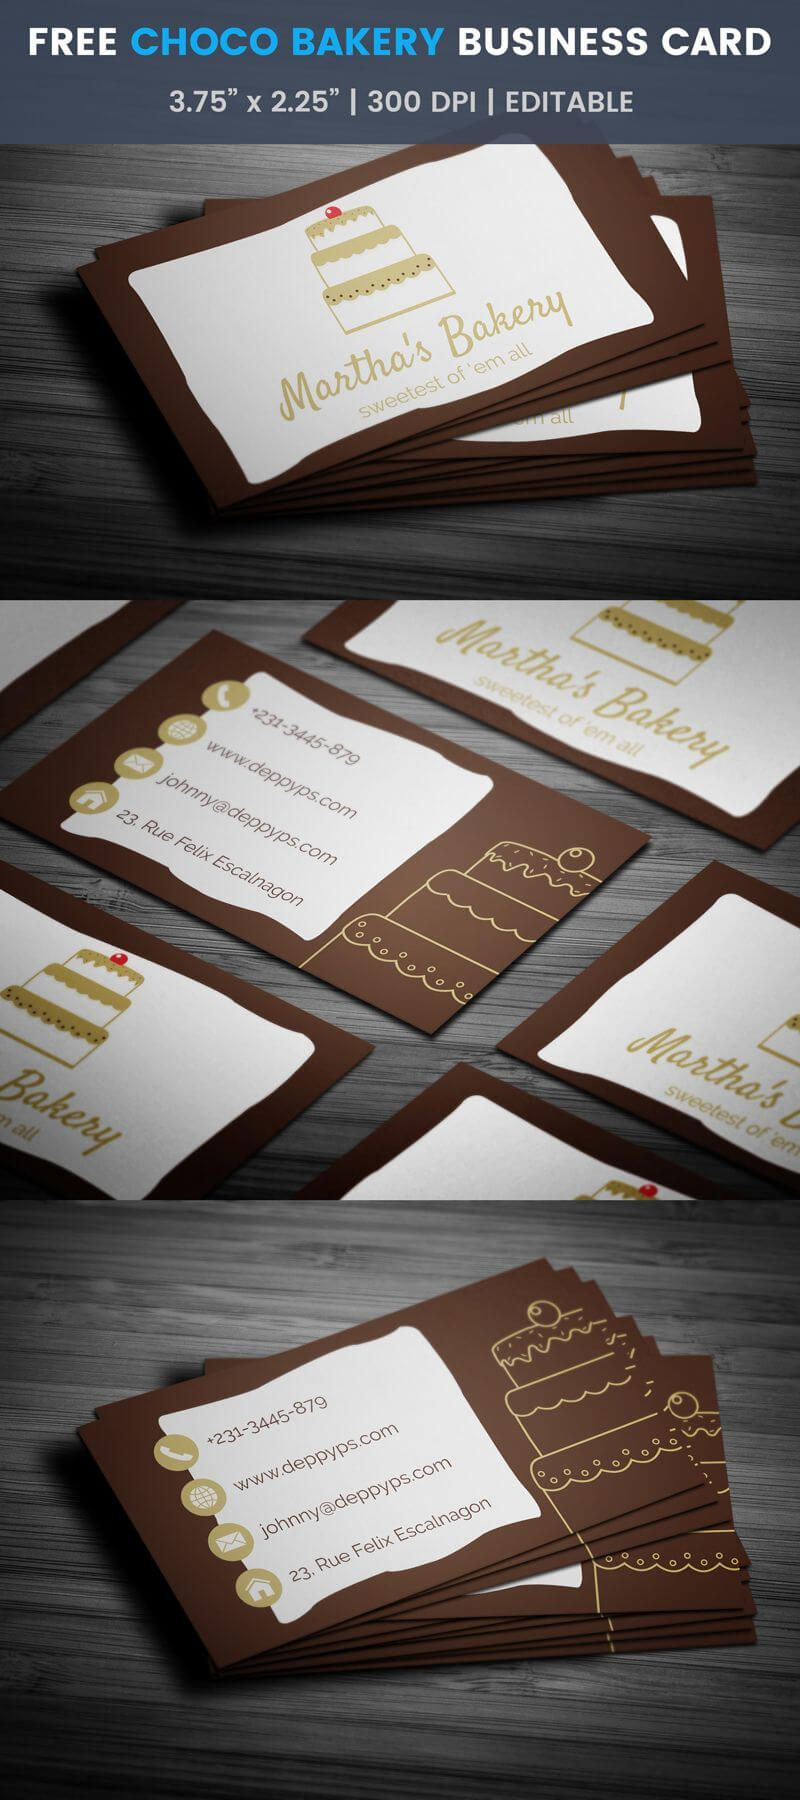 3 Layer Chocolate Cake' Bakery Business Card Template #bake For Cake Business Cards Templates Free